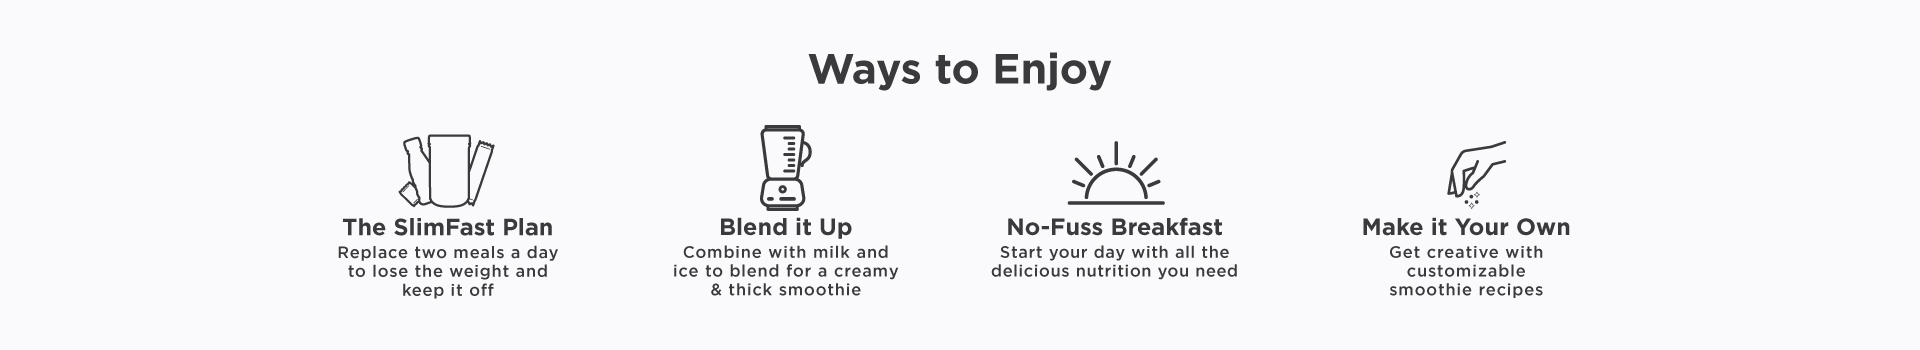 Ways to enjoy Advanced Nutrition Shakes: Use them on the SlimFast plan, take them on the go, have a no-fuss breakfast, or make it your own